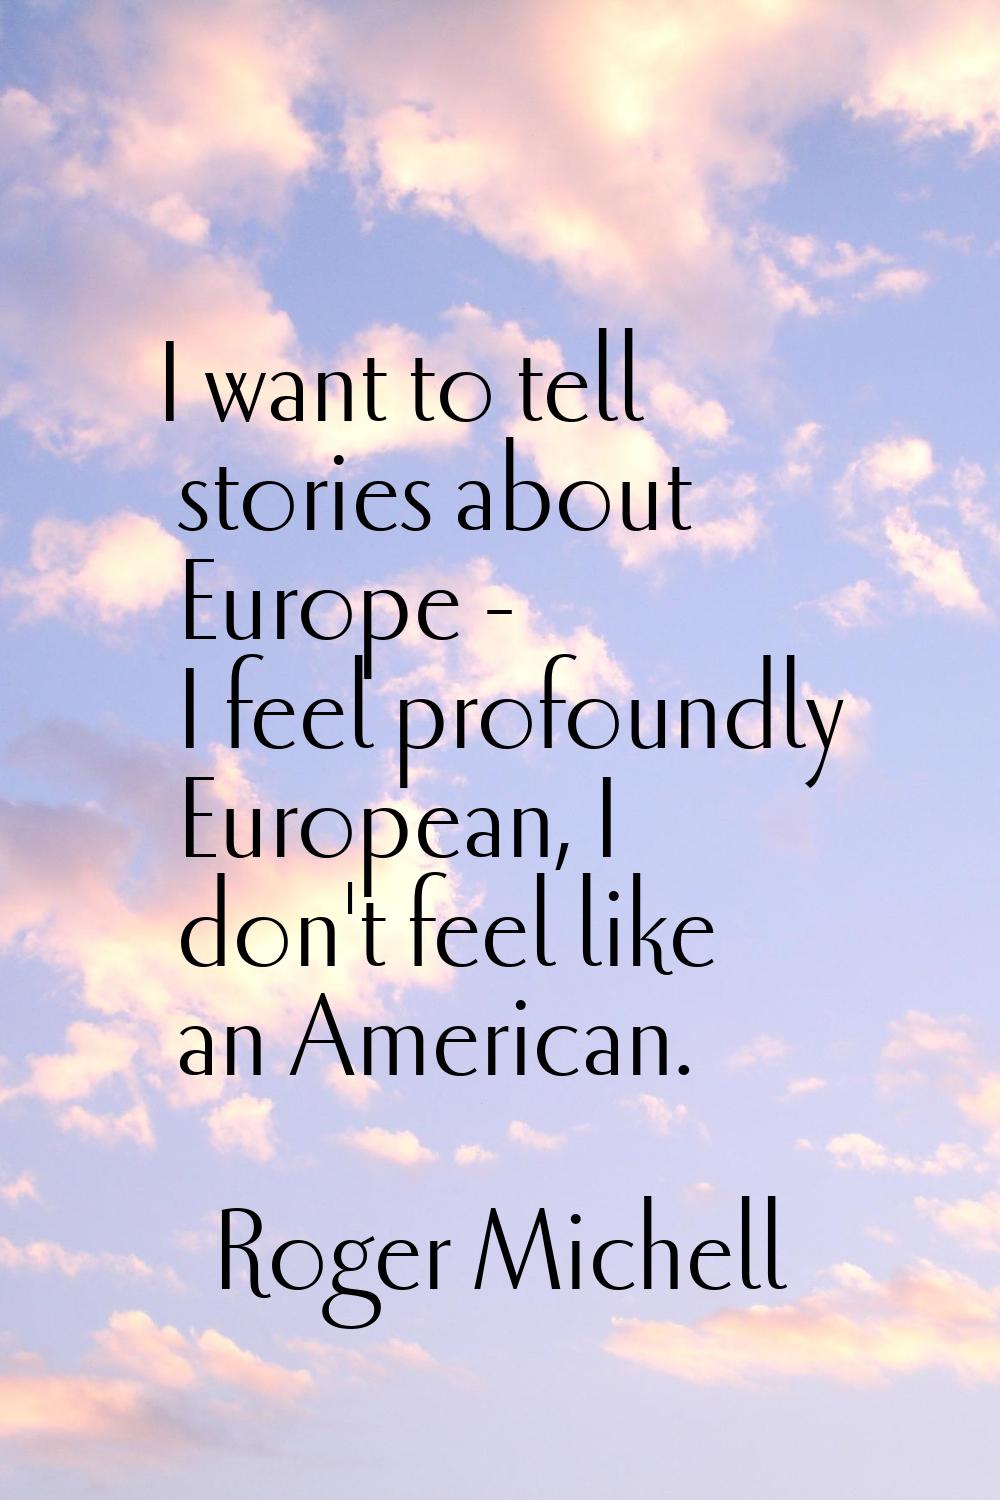 I want to tell stories about Europe - I feel profoundly European, I don't feel like an American.